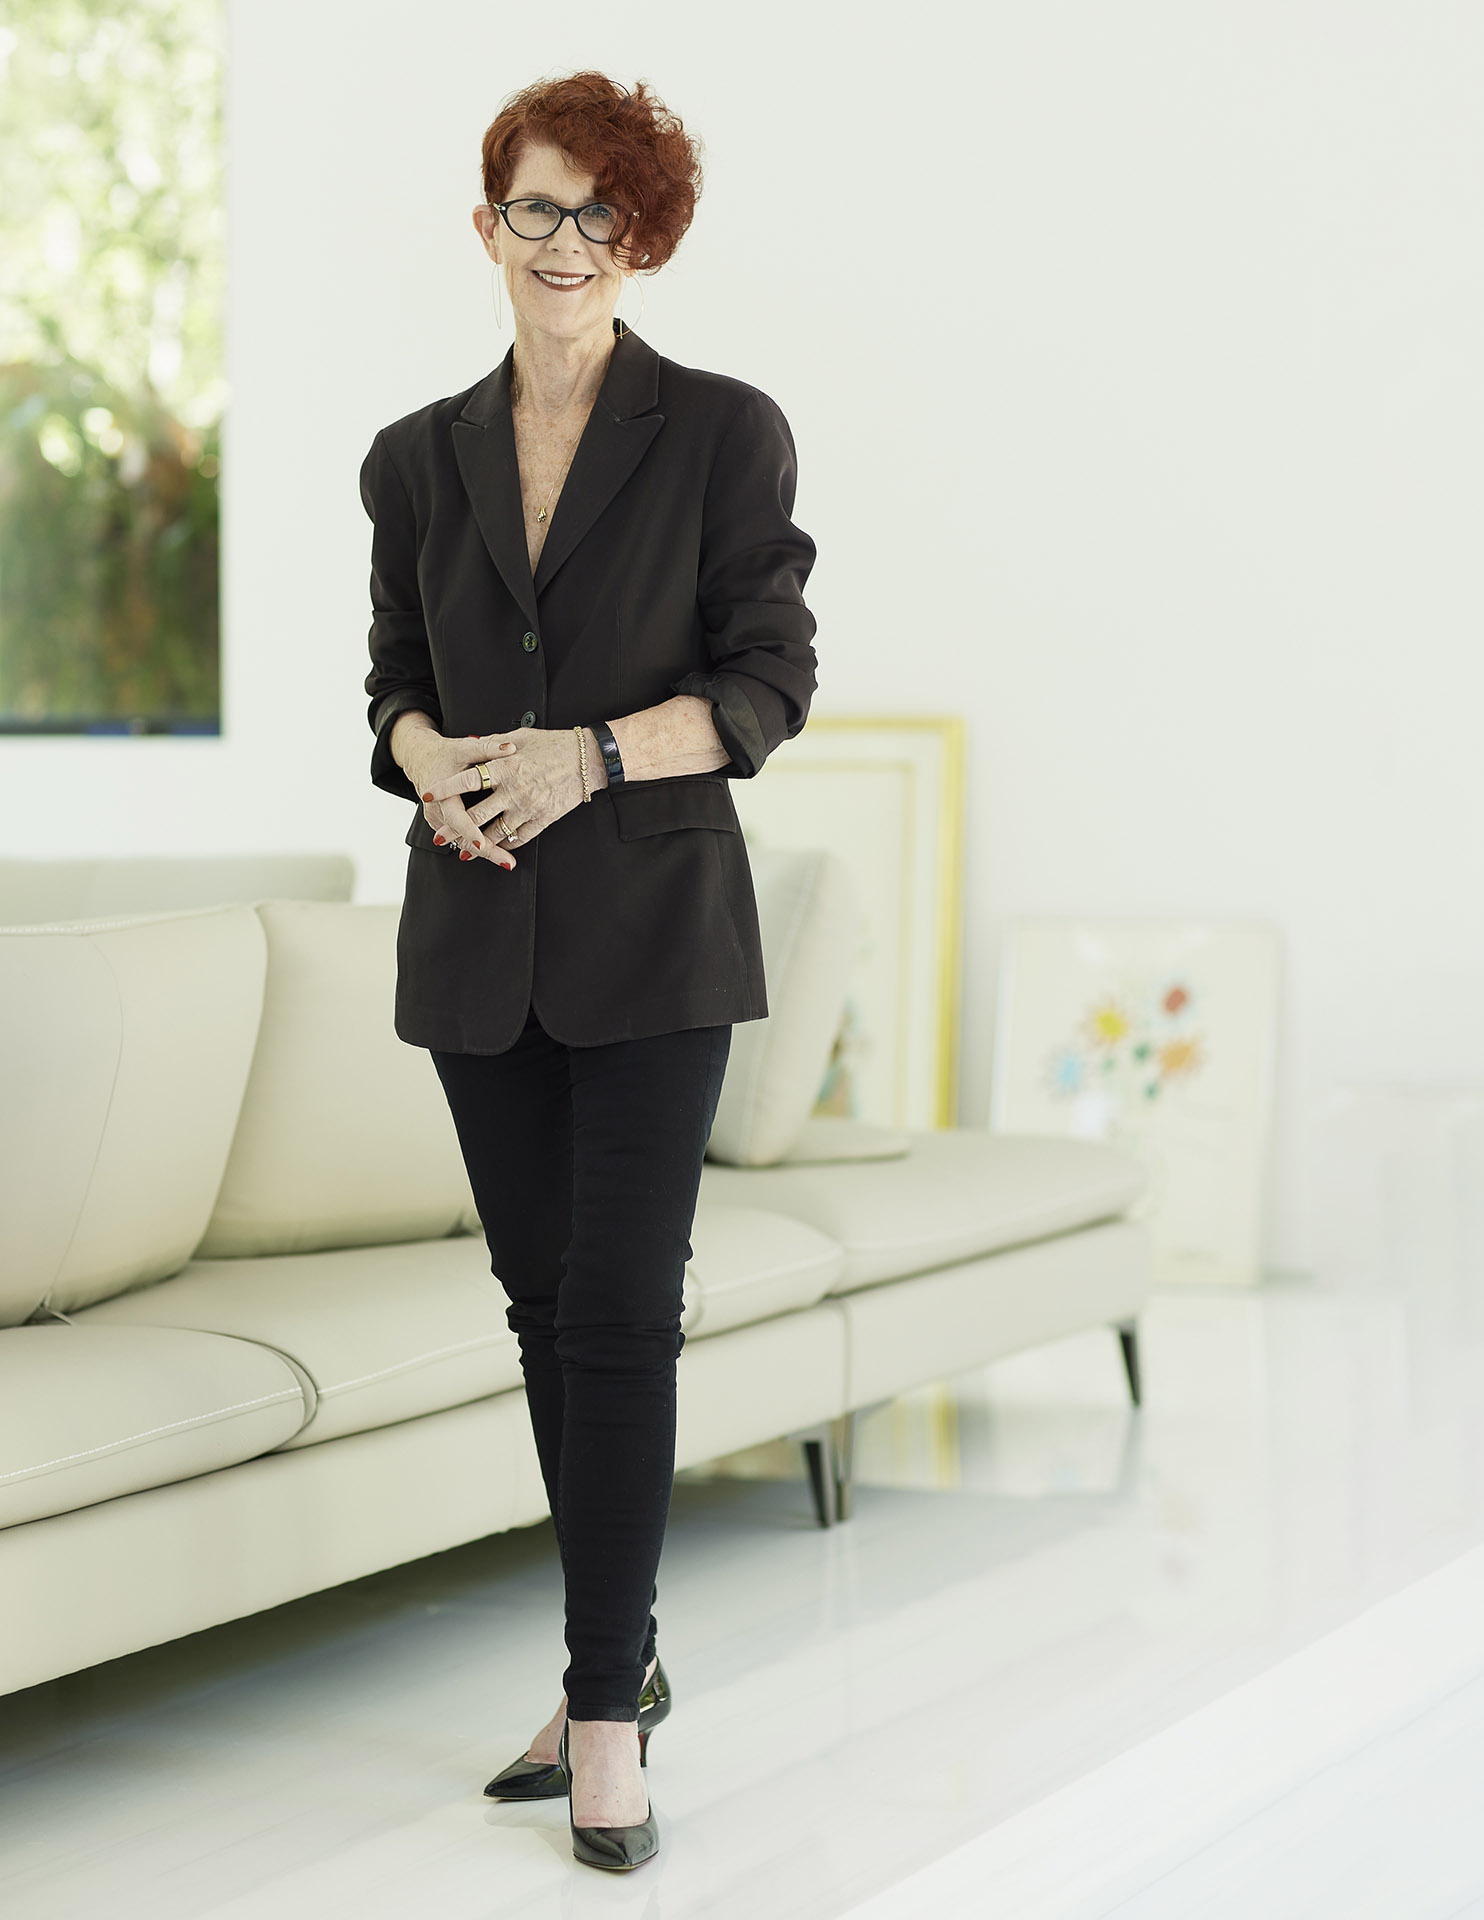 Dr. Barbara Coffey photographed at her home in Miami, Fl.